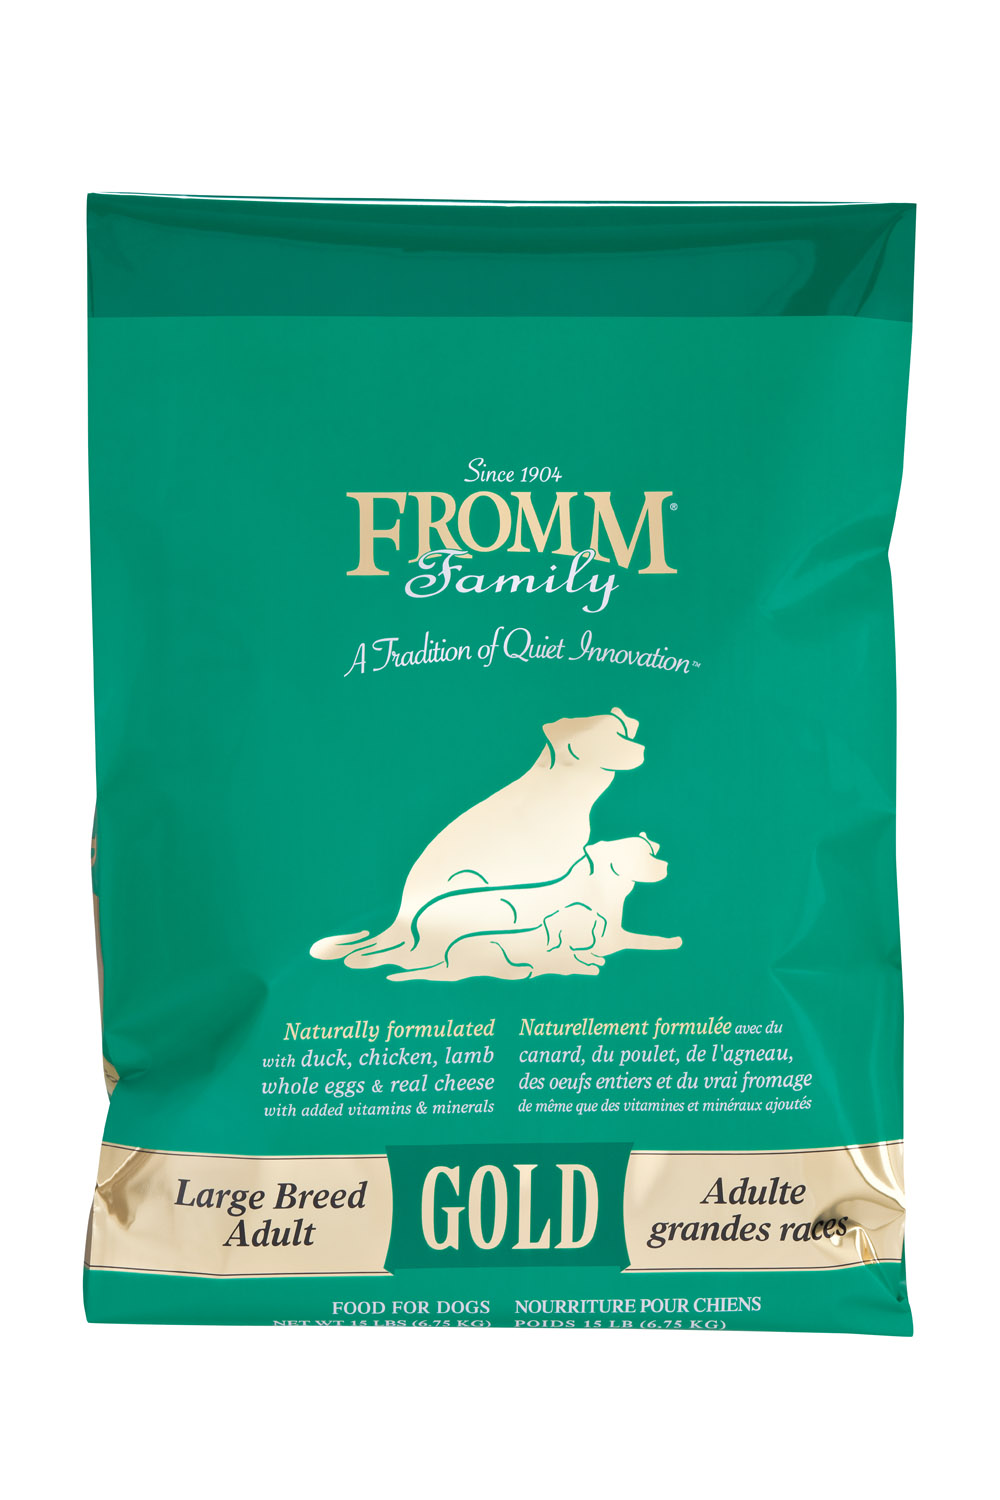 Fromm Family Large Breed Adult Gold Food for Dogs, 15 lbs